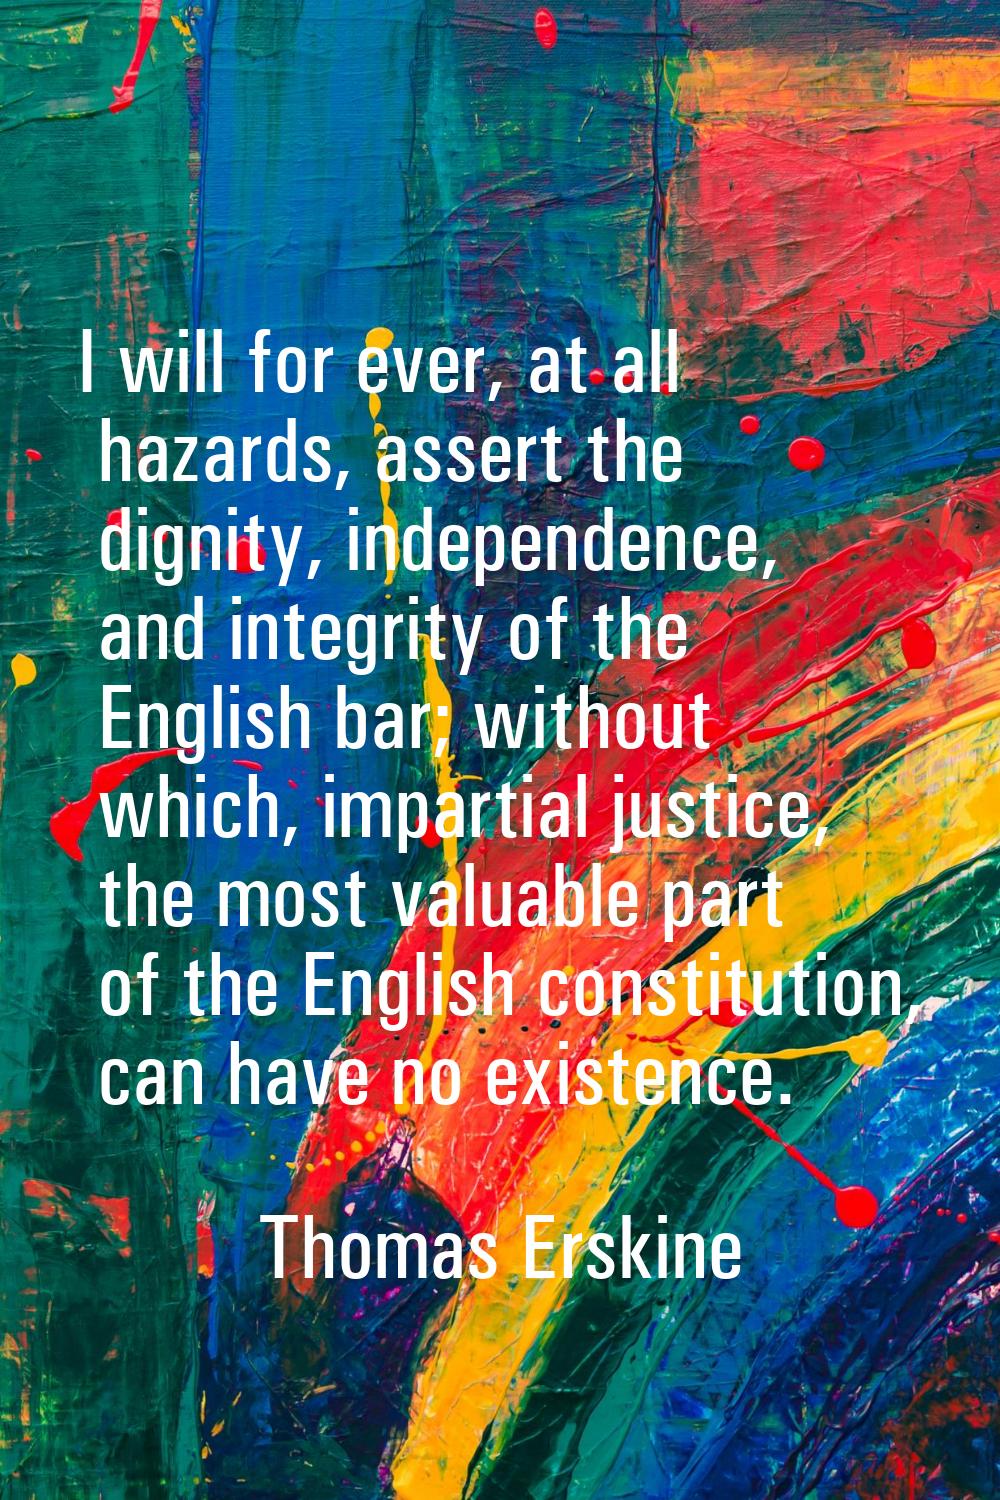 I will for ever, at all hazards, assert the dignity, independence, and integrity of the English bar